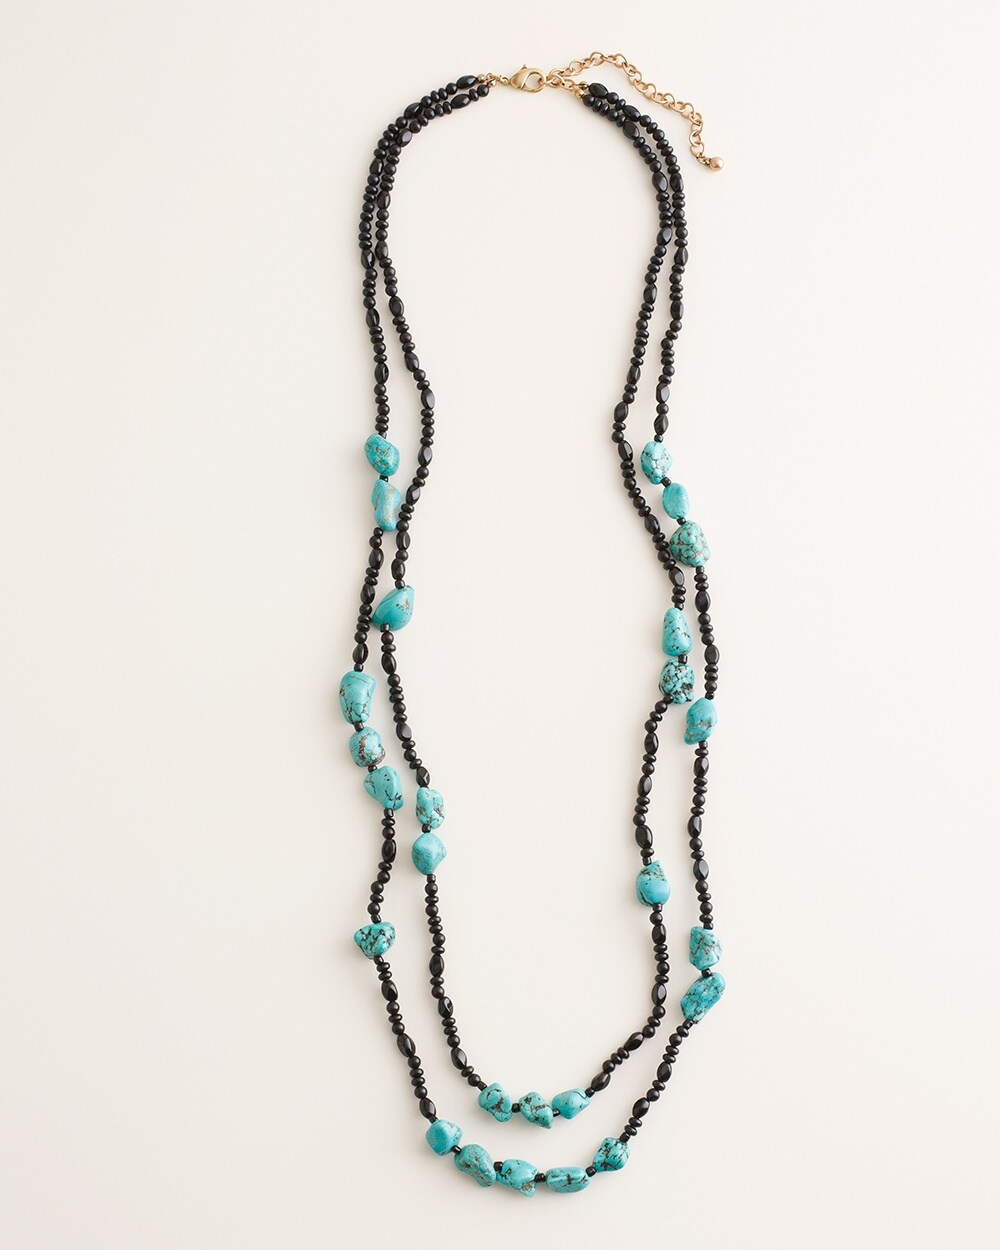 Black and Simulated Turquoise Double-Strand Necklace